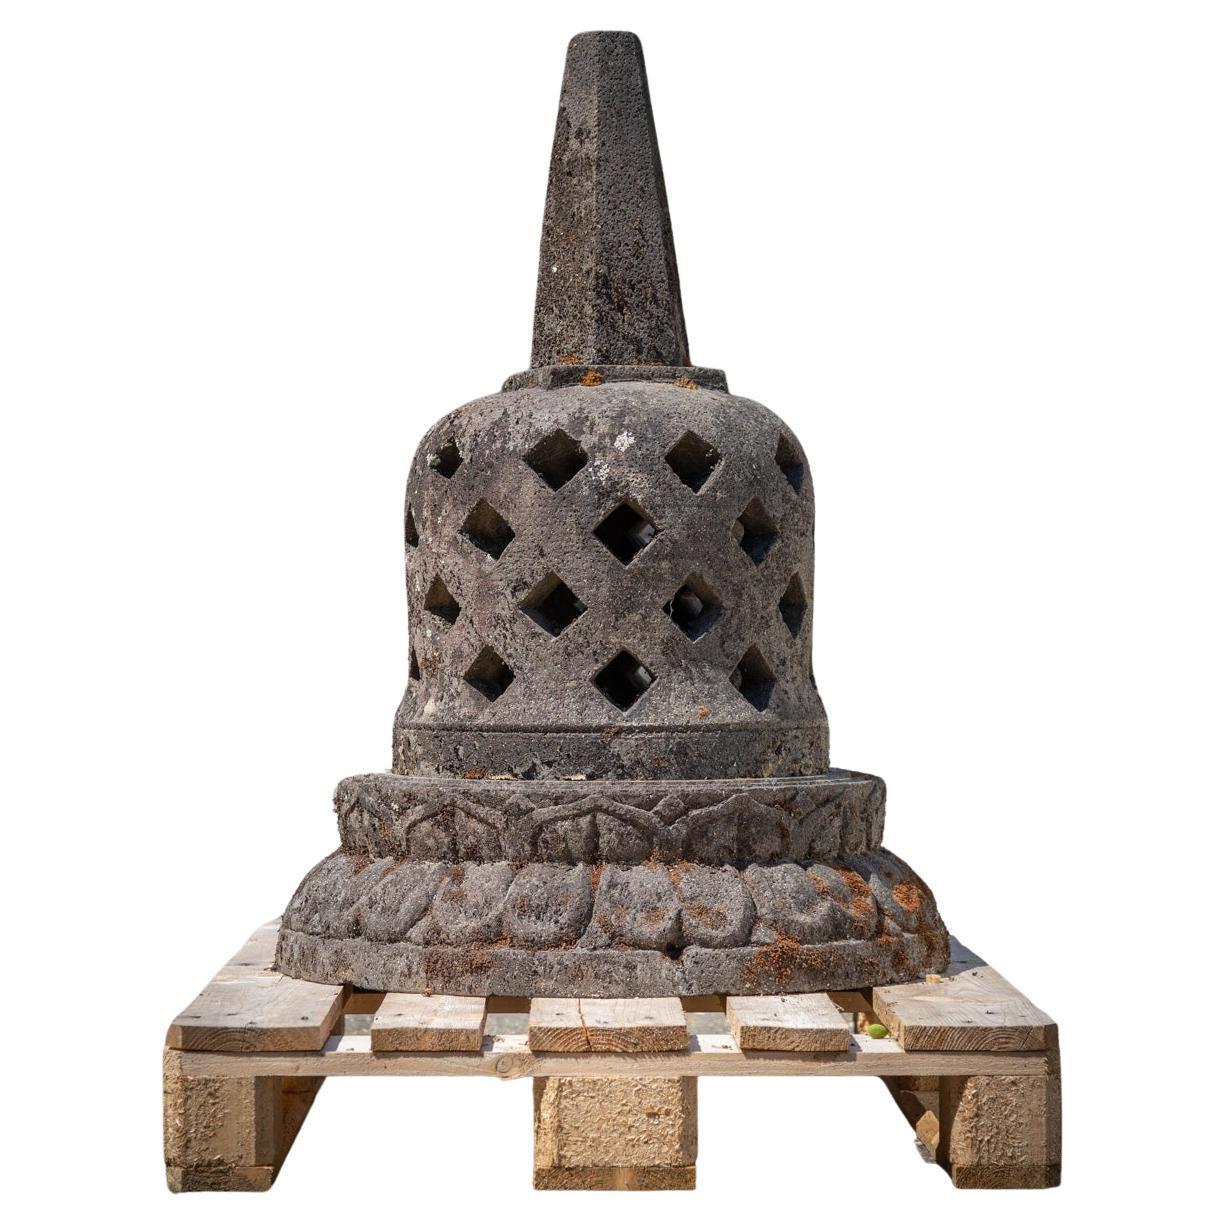 Middle 20th century old lavastone Stupa from Indonesia - OriginalBuddhas For Sale